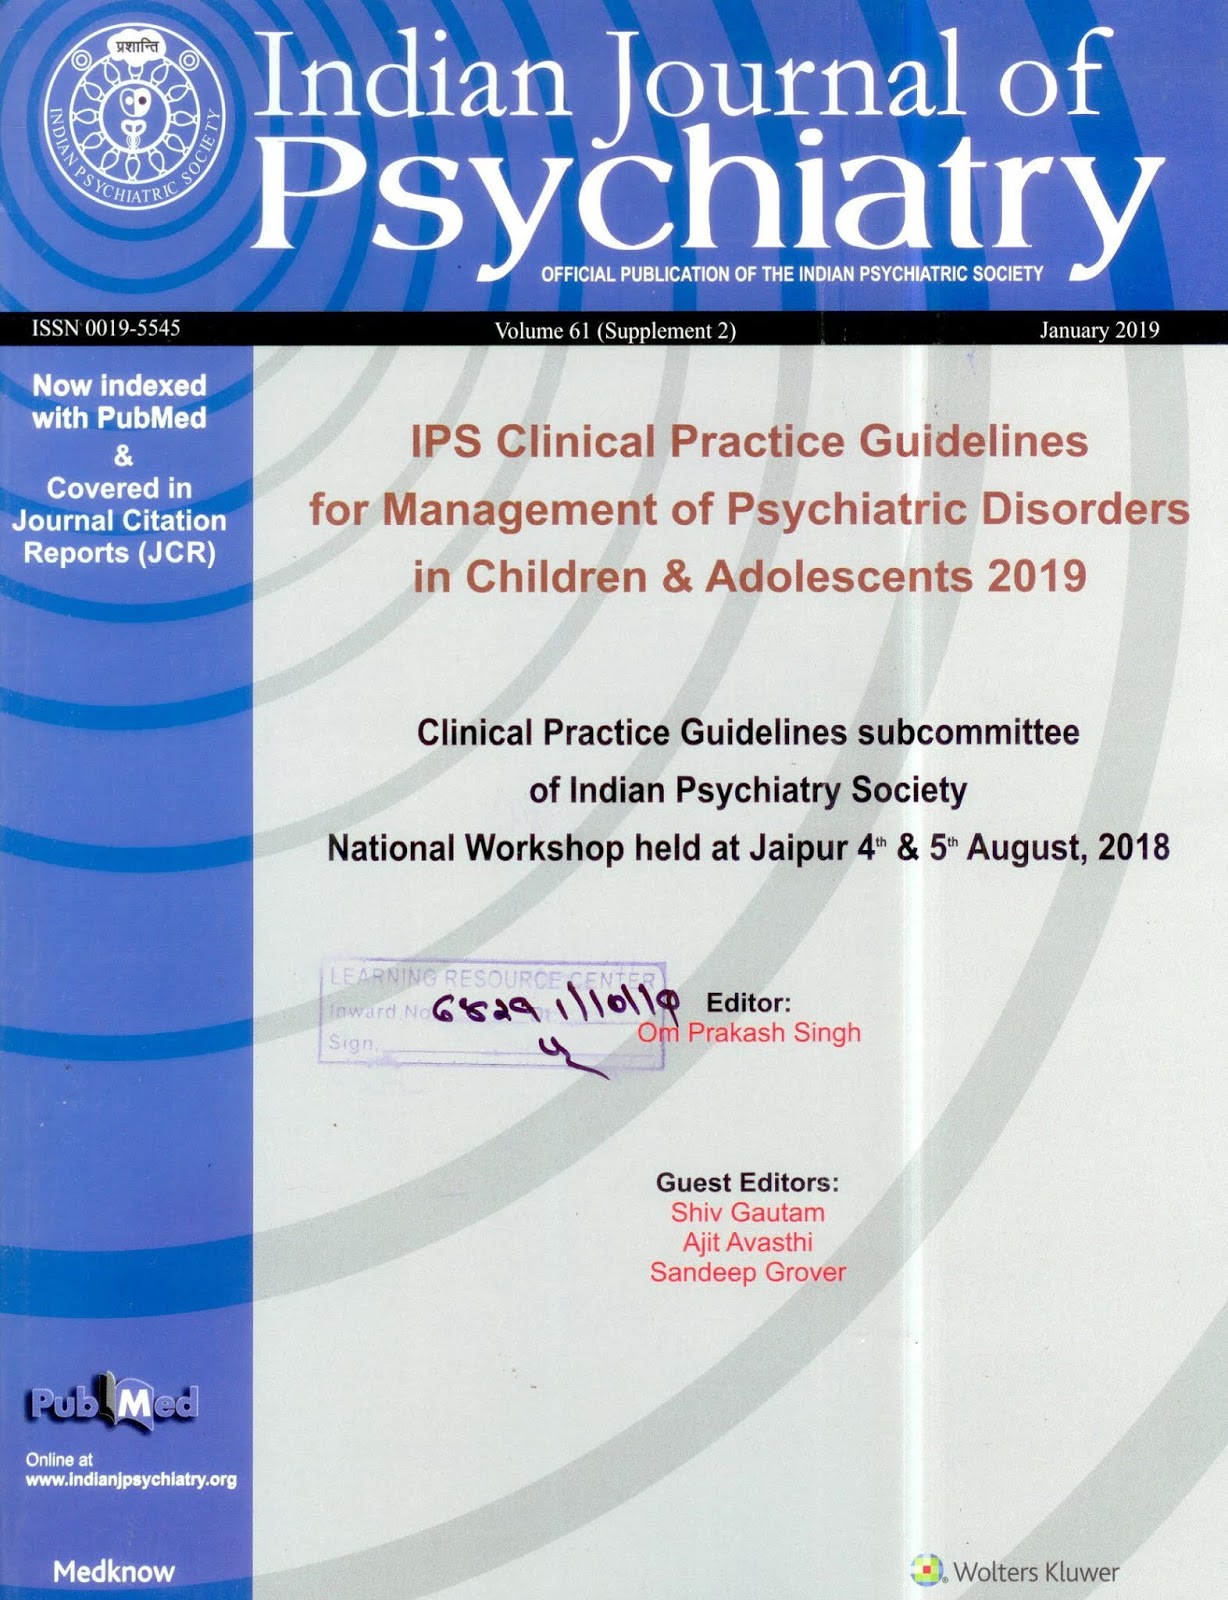 http://www.indianjpsychiatry.org/showBackIssue.asp?issn=0019-5545;year=2019;volume=61;issue=8;month=January;supp=Y